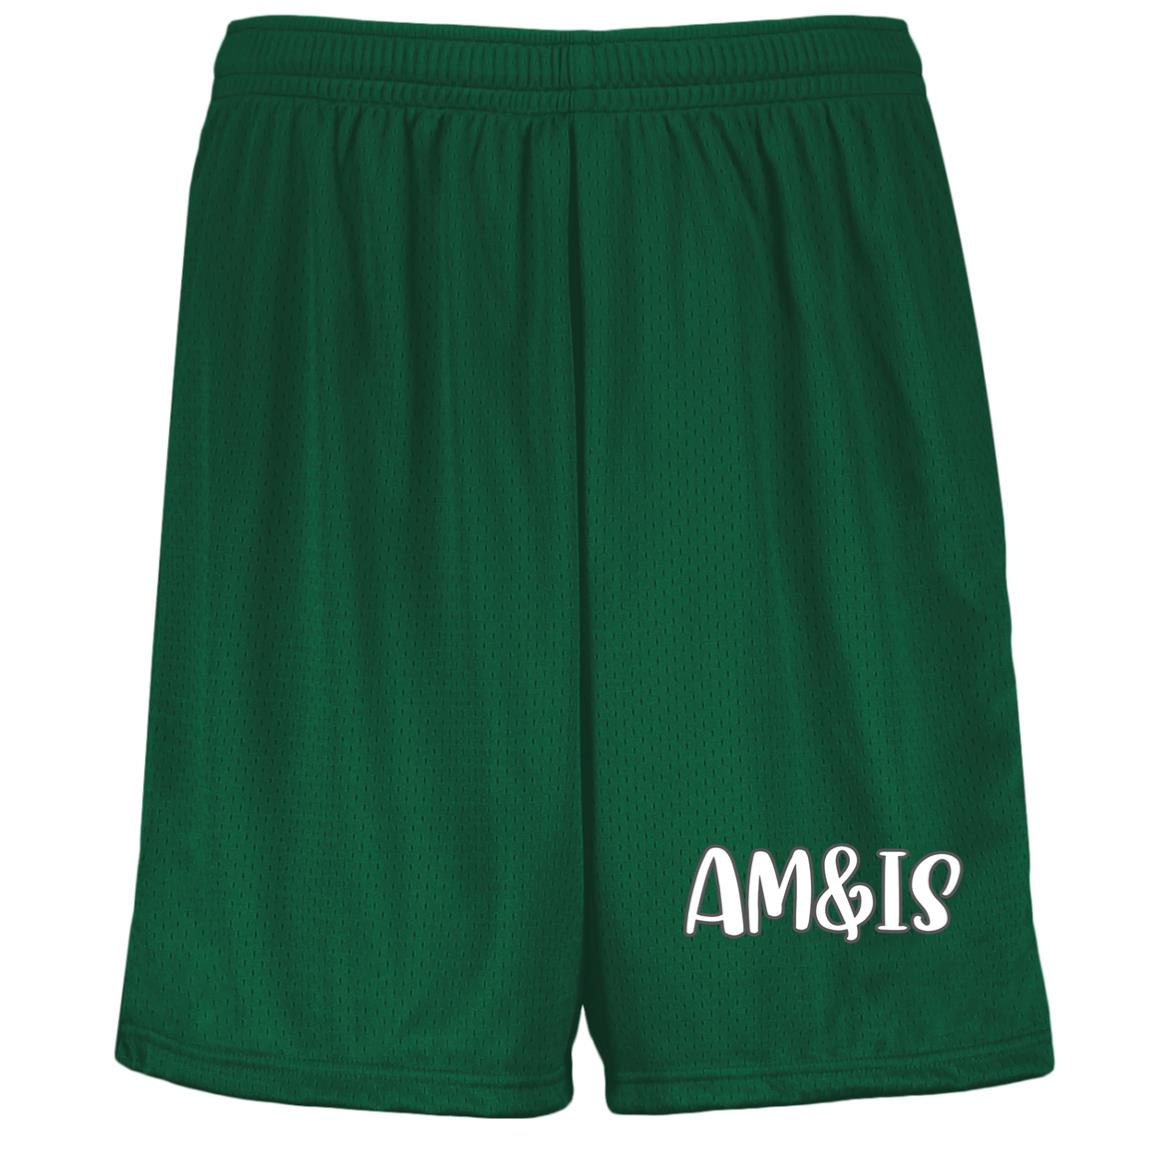 FOREST - AM&IS Activewear Youth Moisture-Wicking Mesh Shorts - kids shorts at TFC&H Co.